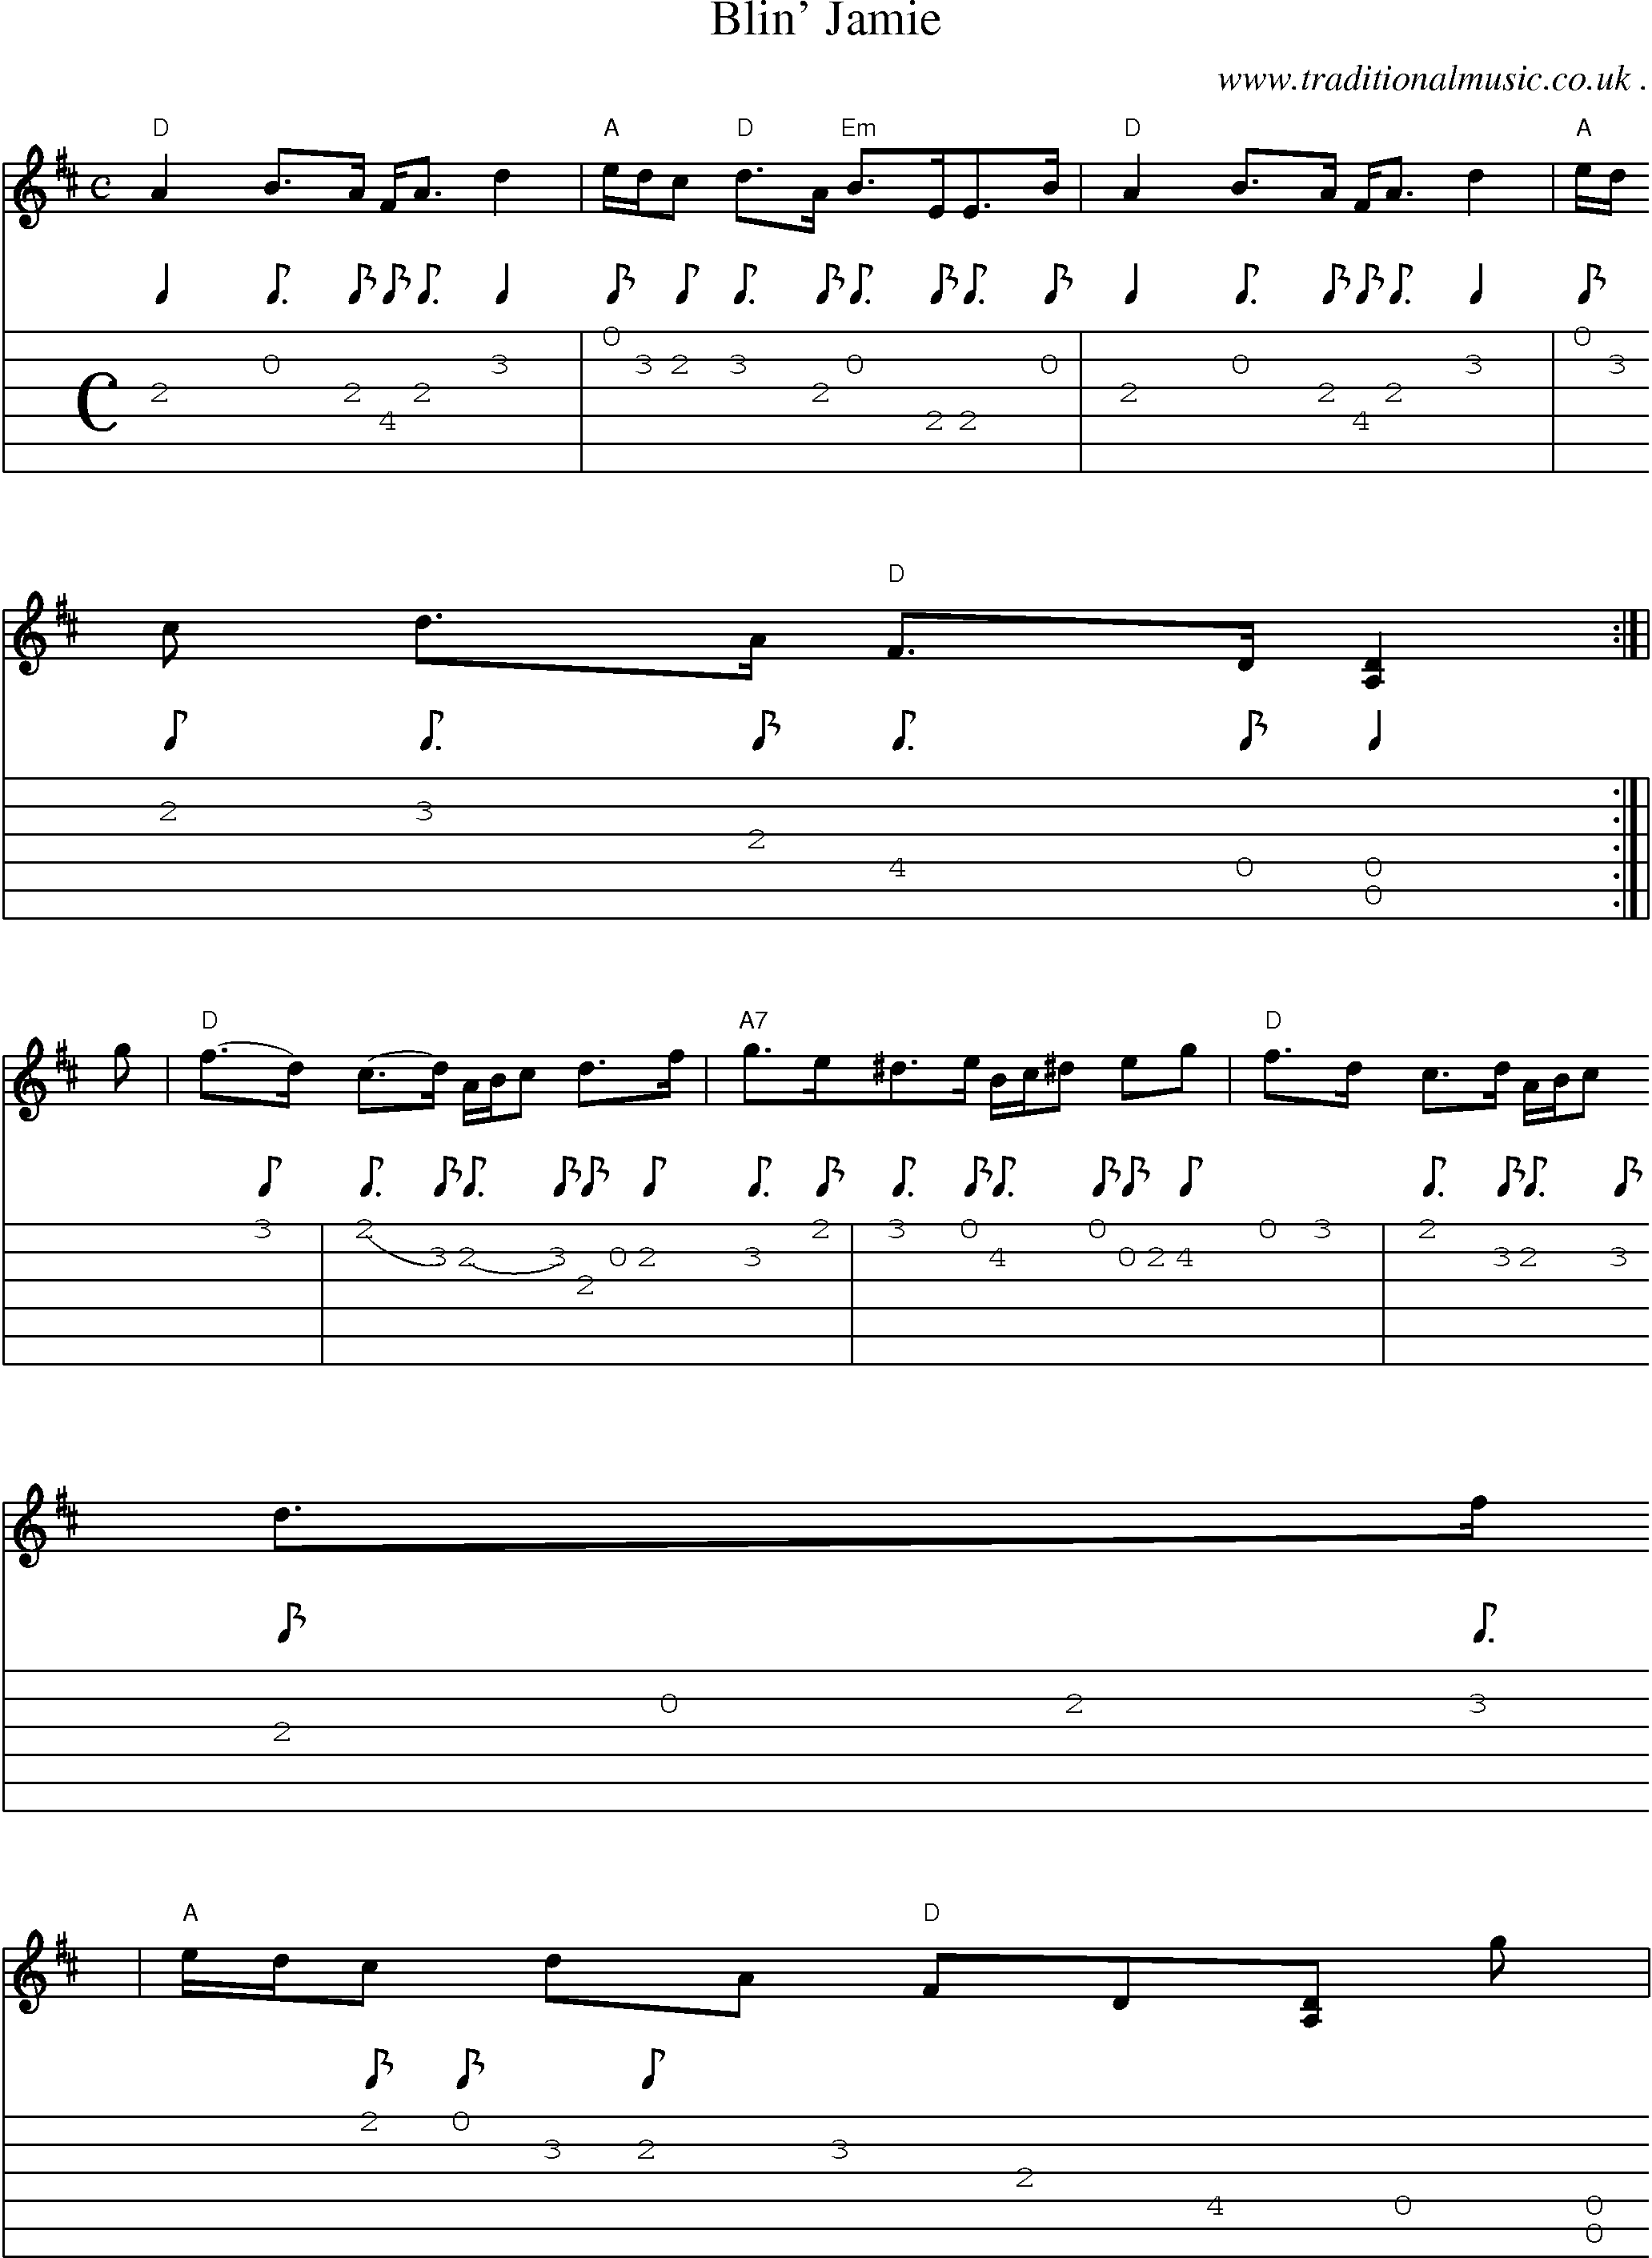 Sheet-music  score, Chords and Guitar Tabs for Blin Jamie